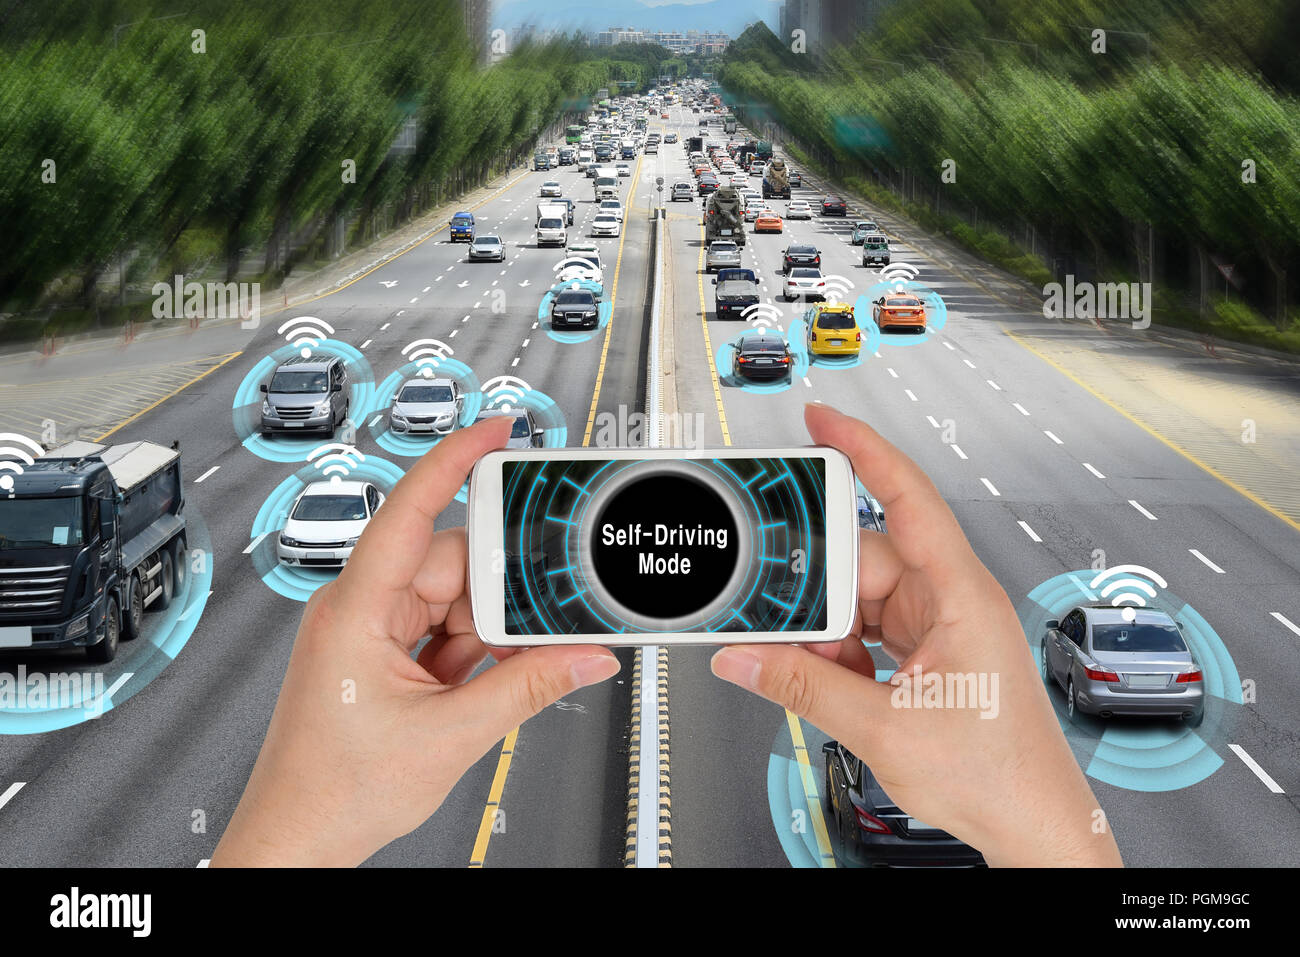 Automobile concept that connects with smart phone and autonomously drives the road. Stock Photo